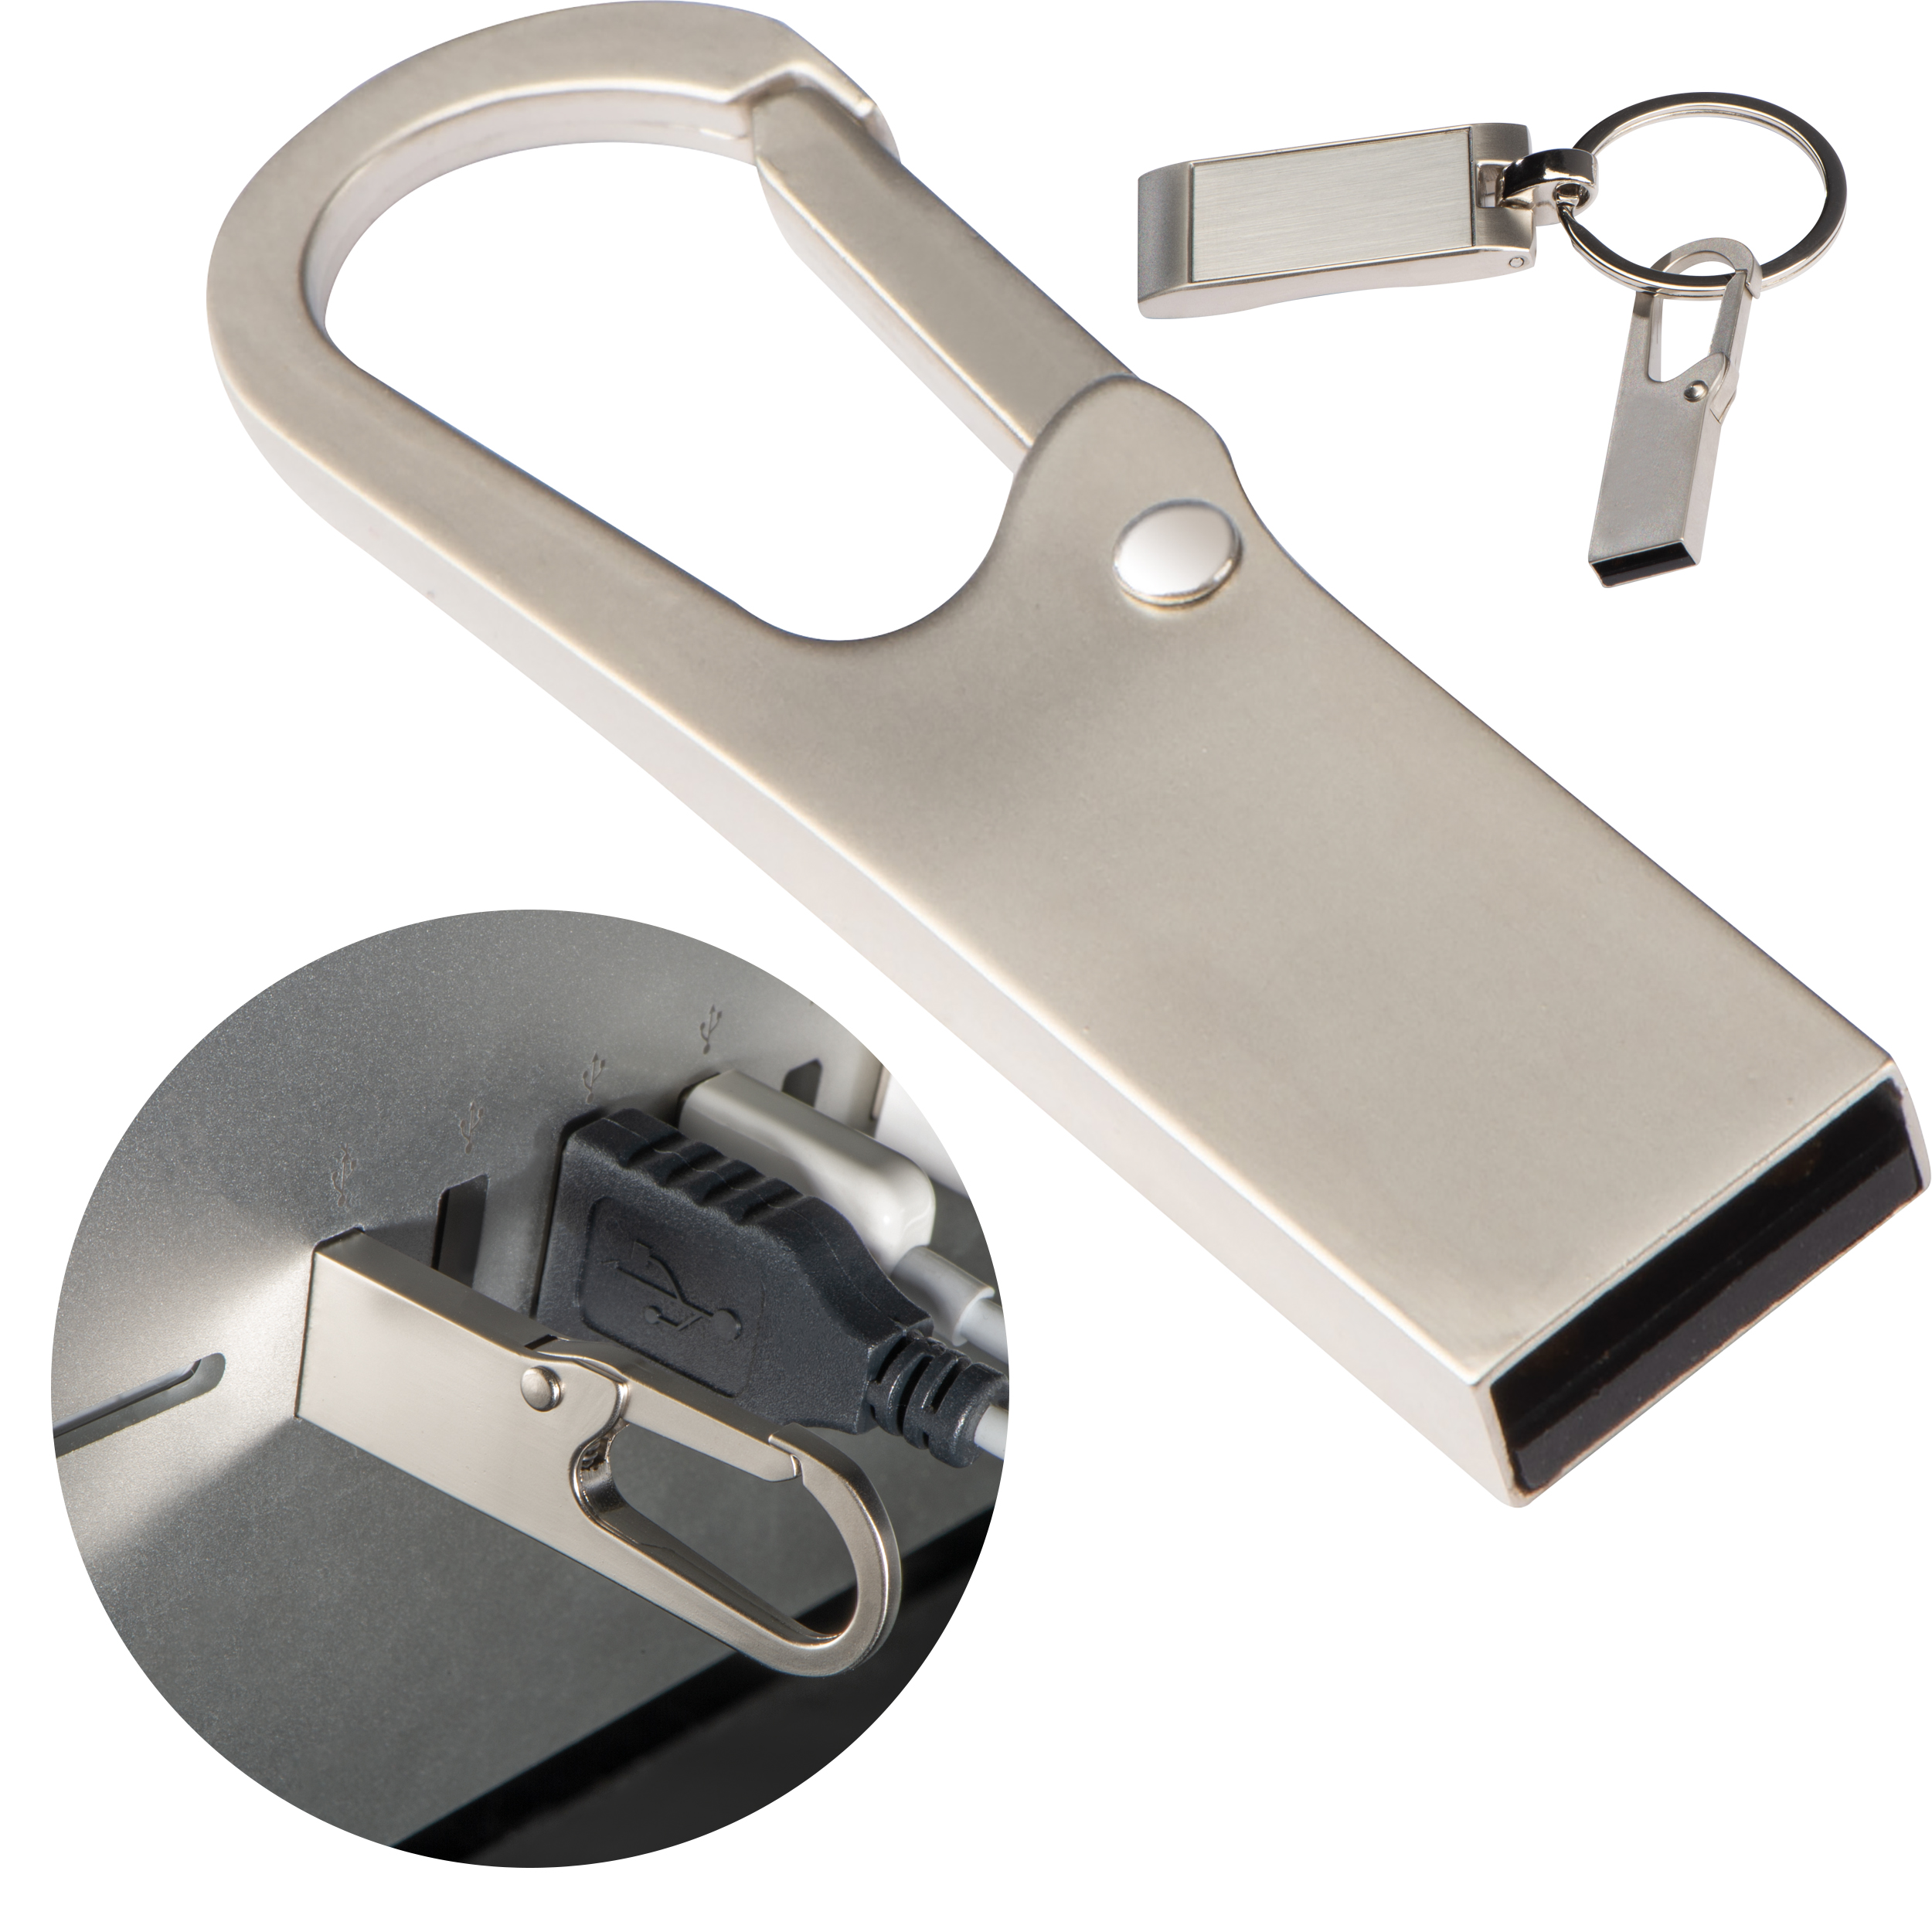 Metal USB stick with carabiner - 8GB